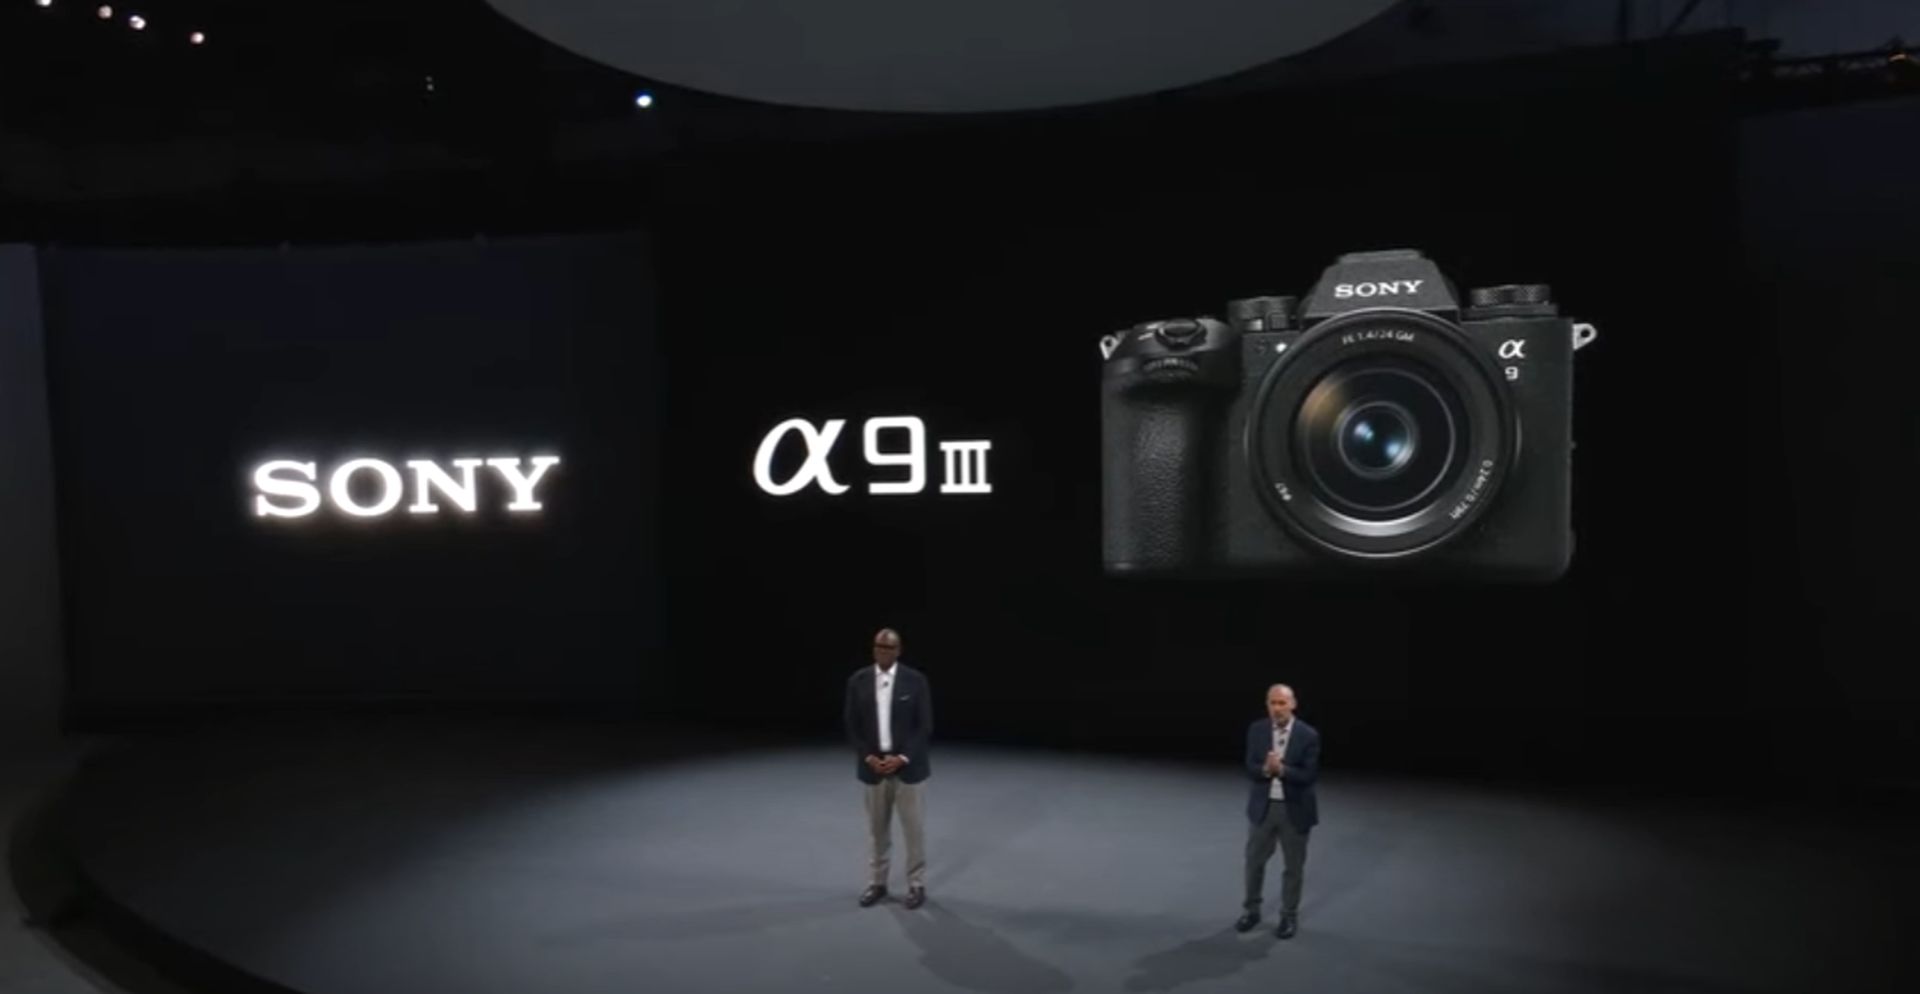 Sony's new technology: A game-changer in the fight against misinformation